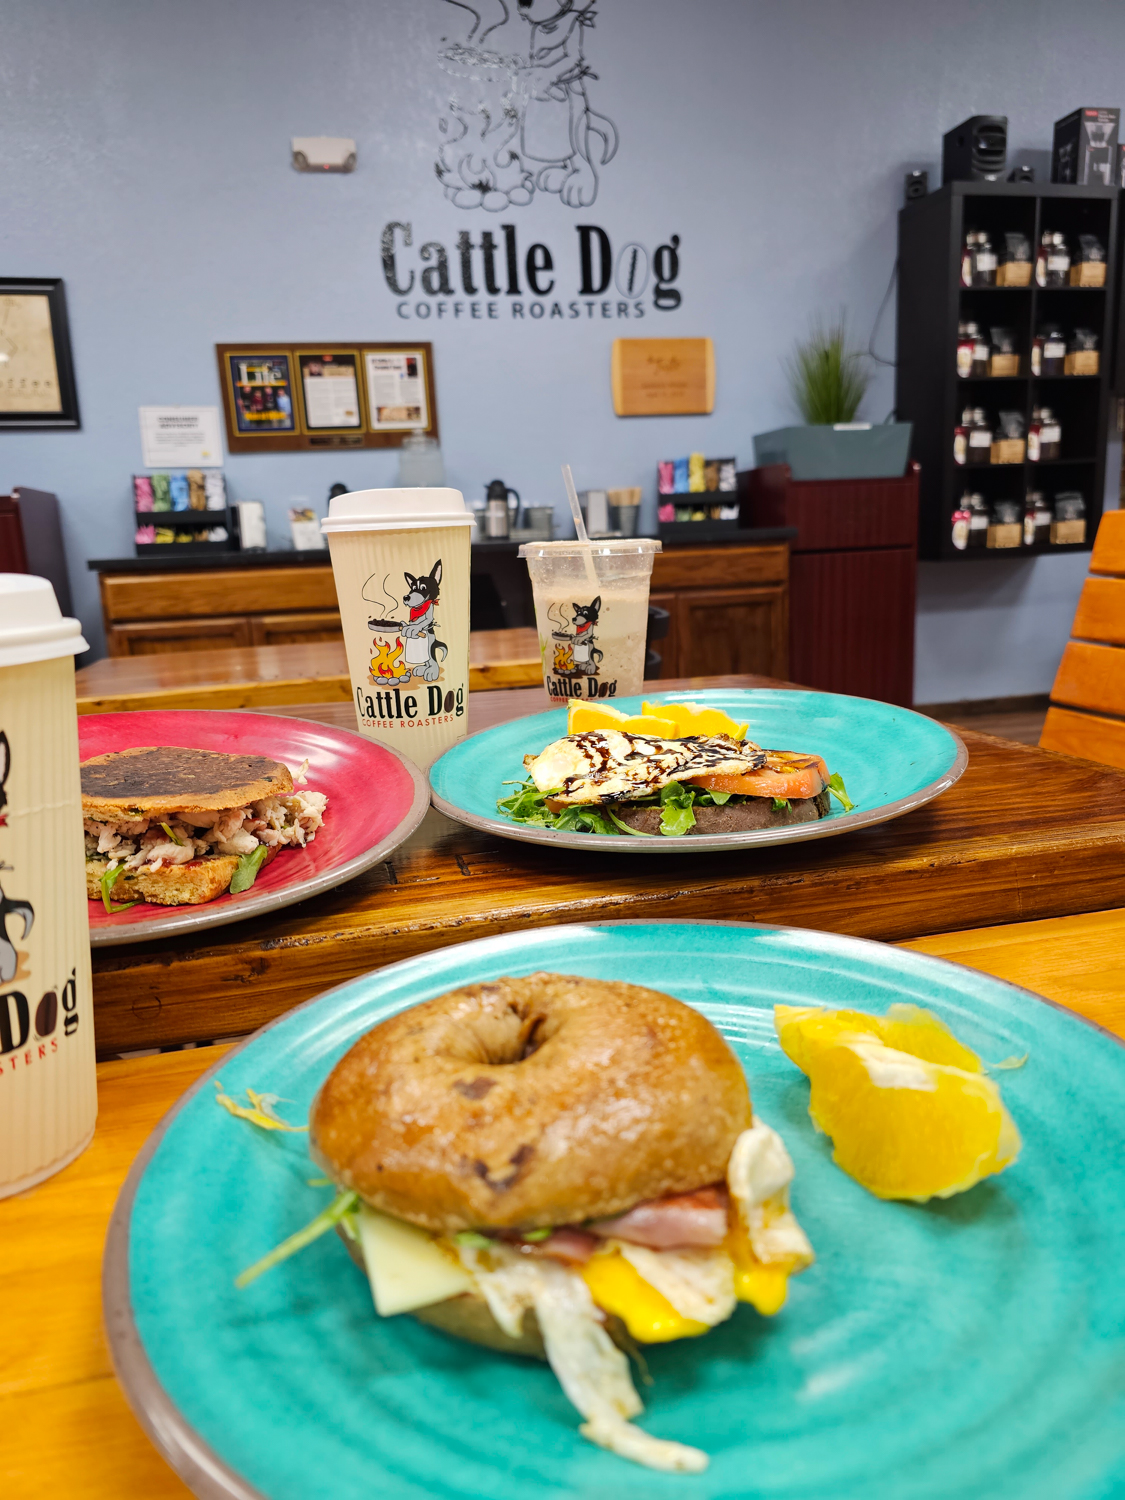 Cattle Dog Coffee Roasters! Travel Tips for A Visit to Inverness FL. A recap of where we stayed, fun outdoor activities to try, and delicious restaurants for a small-town girls' trip!